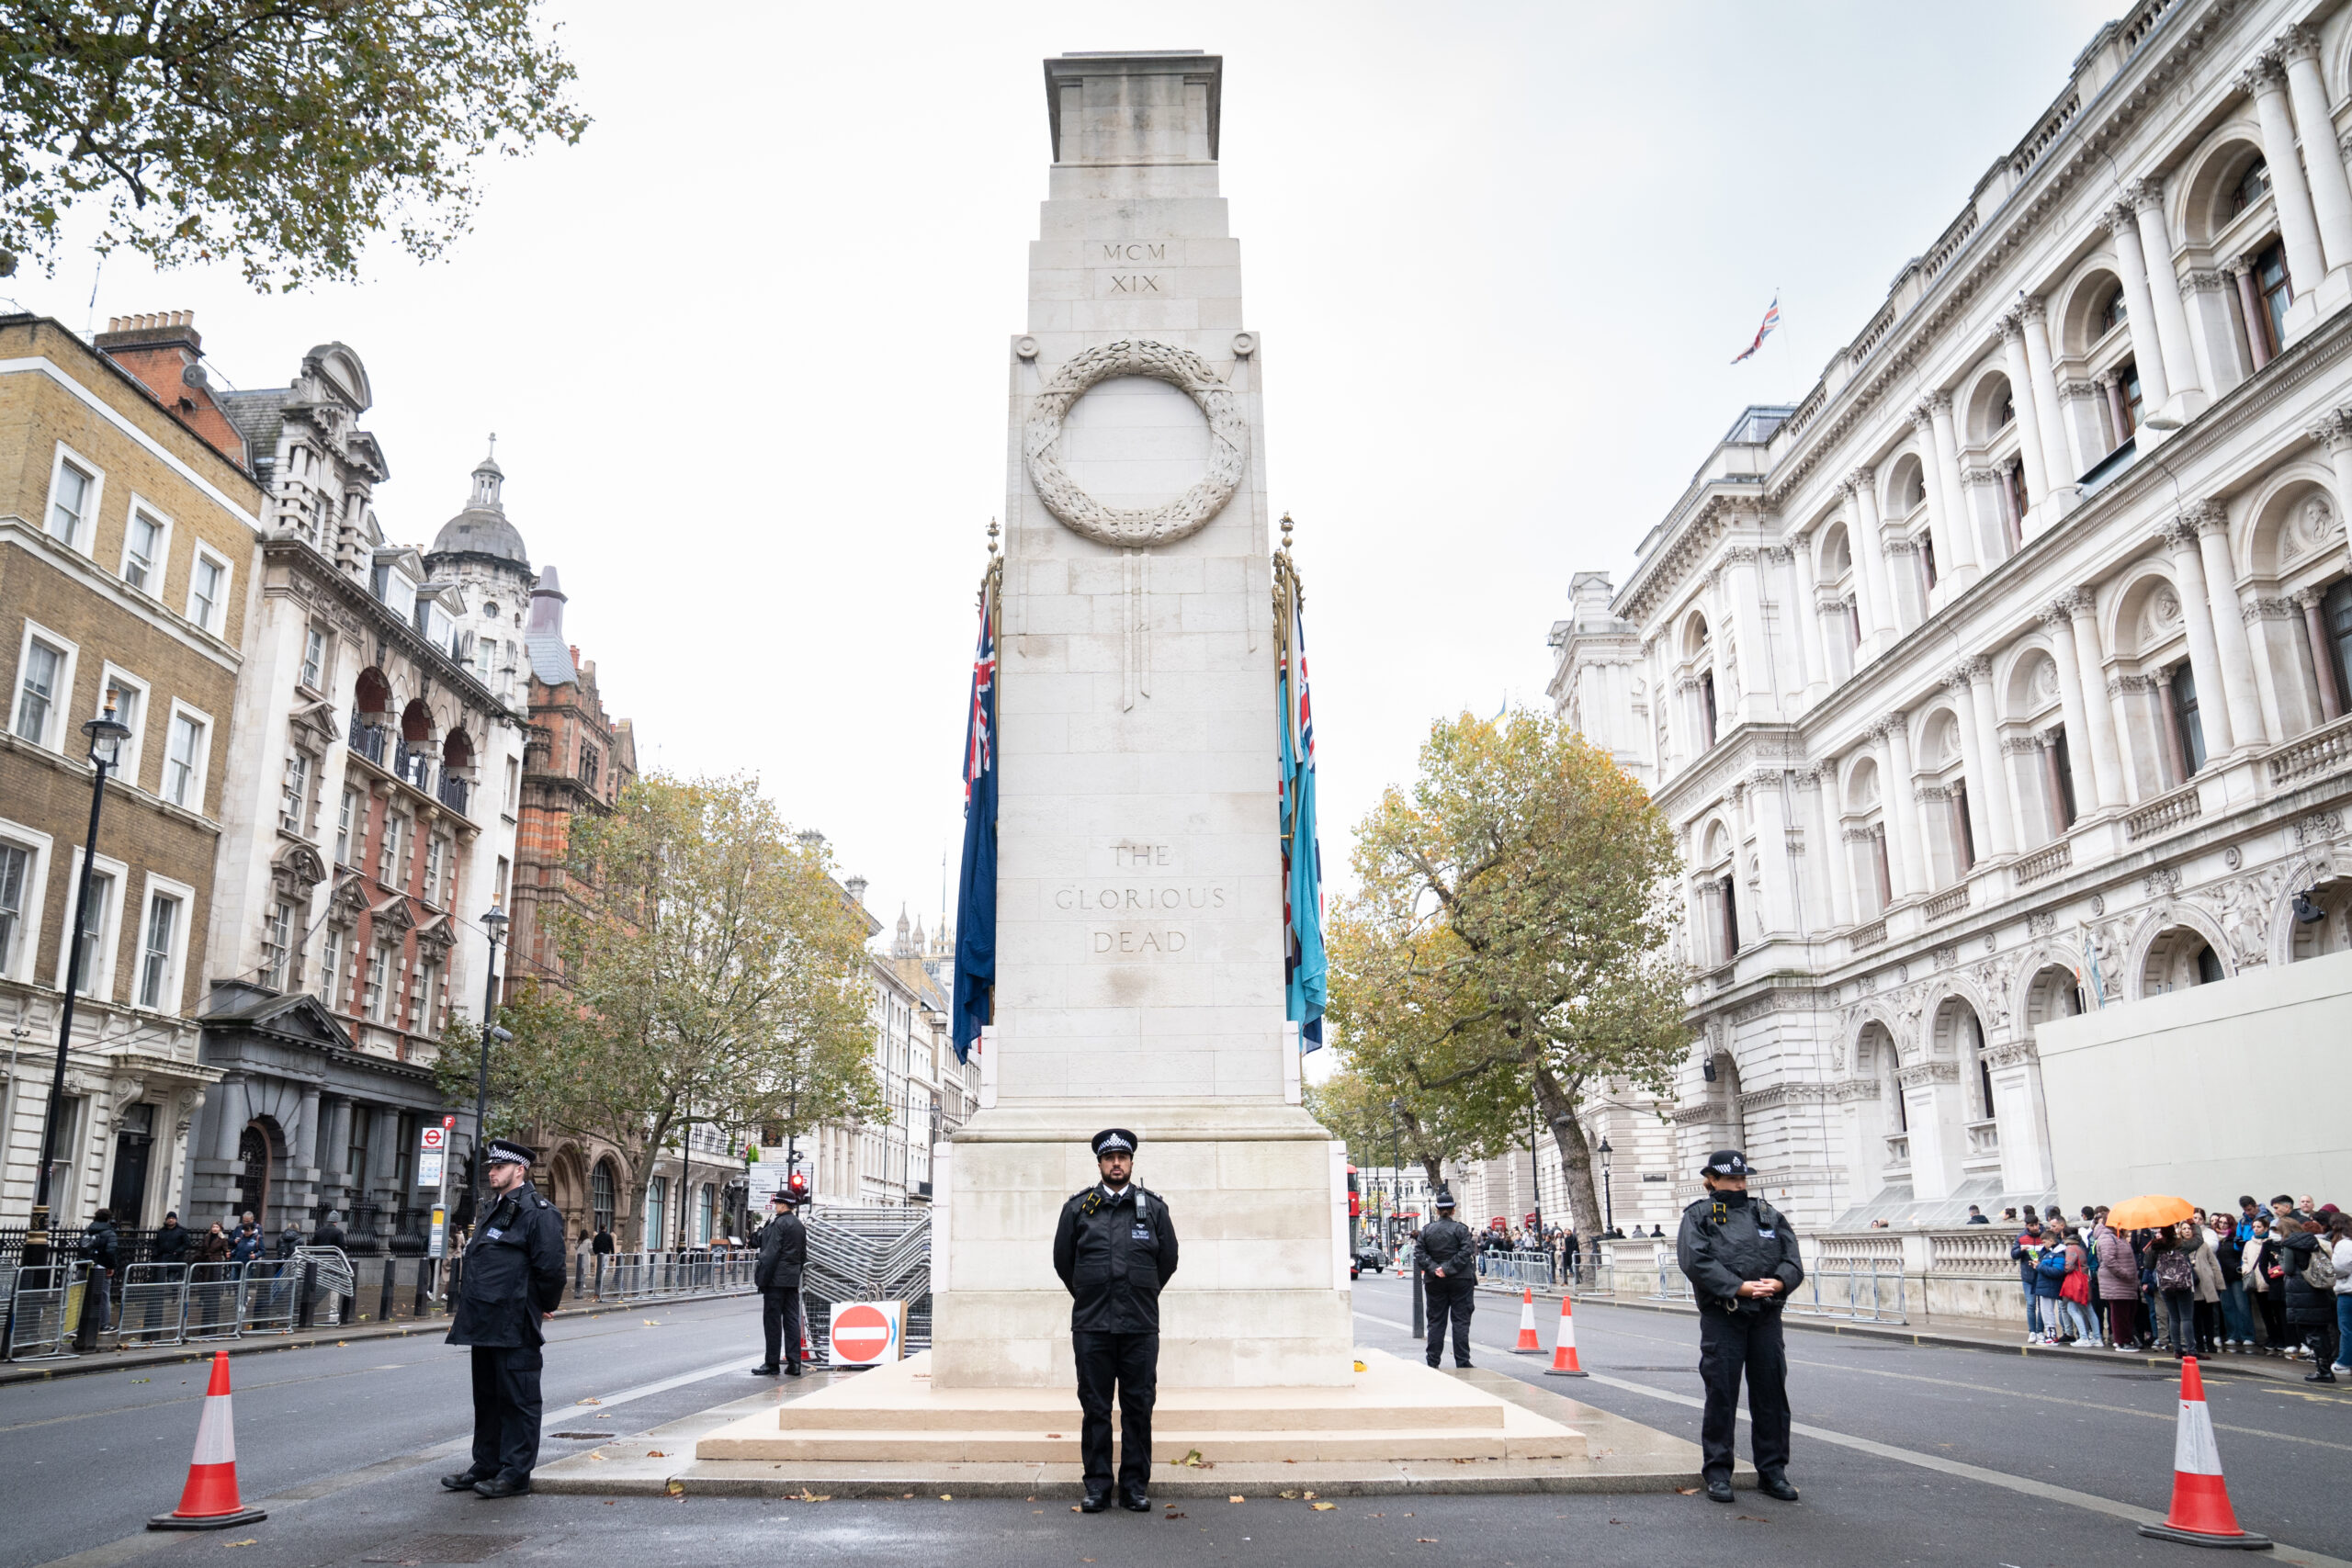 Armistice Day in London: Police Precautions and Calls for Unity